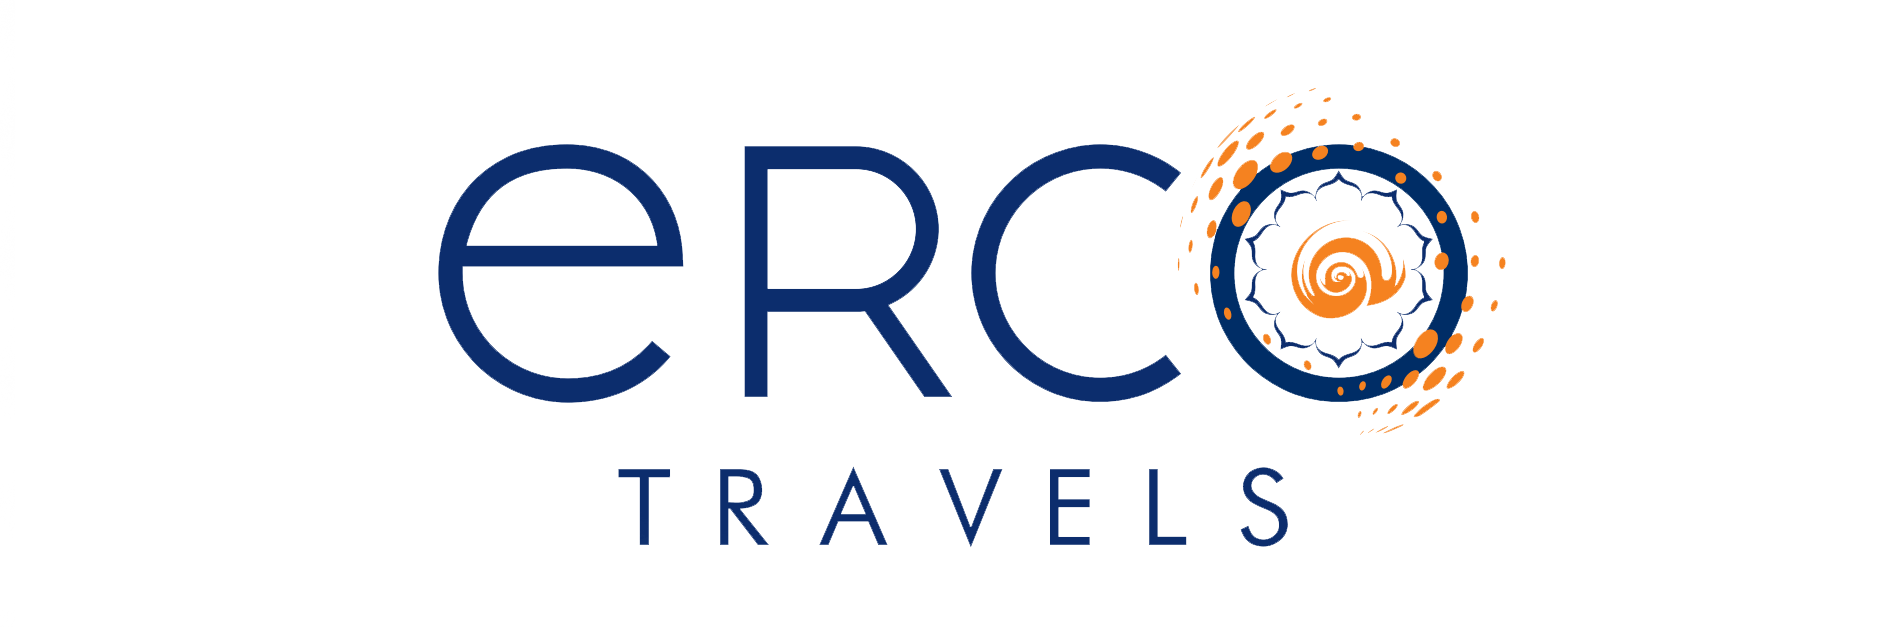 cropped-Erco-logo-png.png